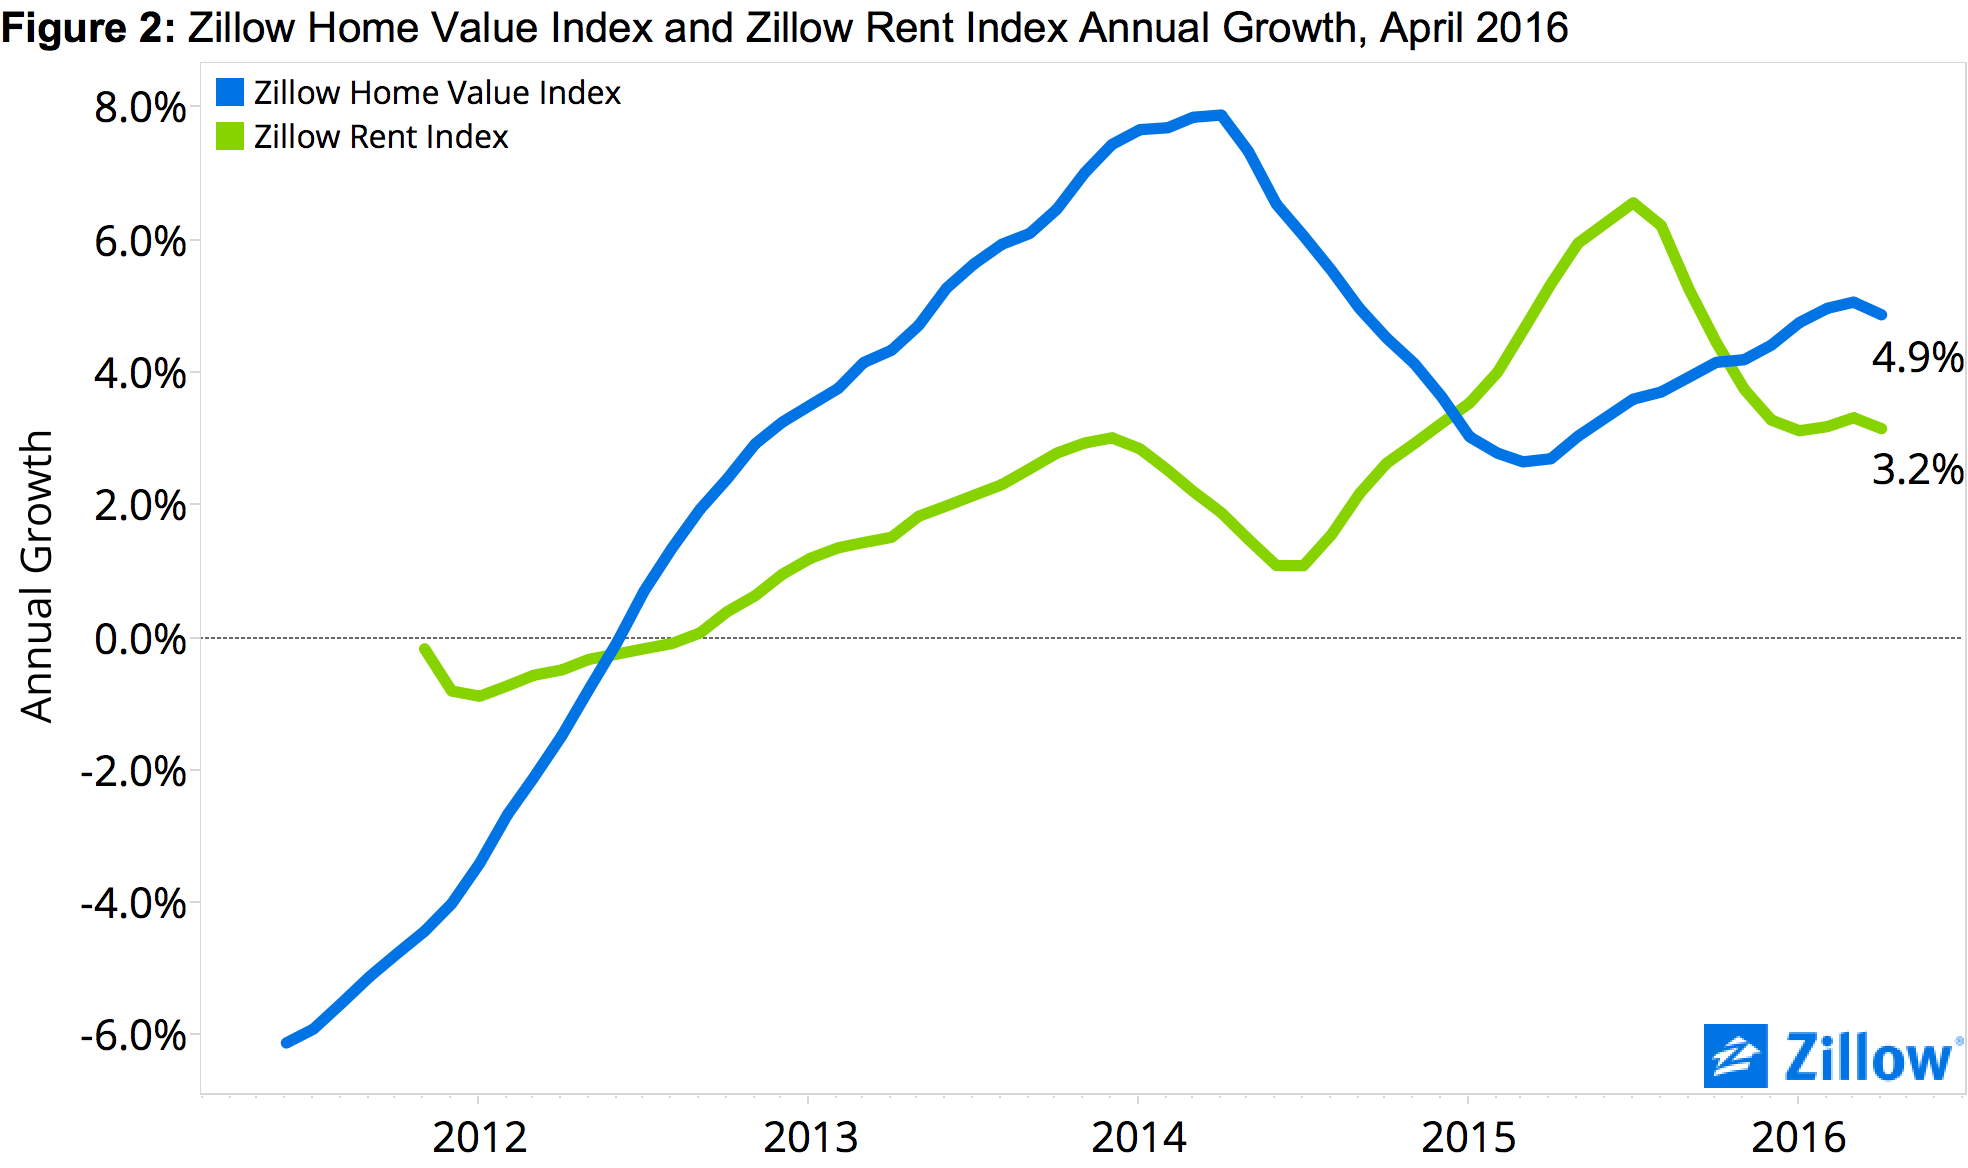 Continuing value. Zillow годовой оборот. Value growth. Индекс хоум. Money, Valuation and growth.